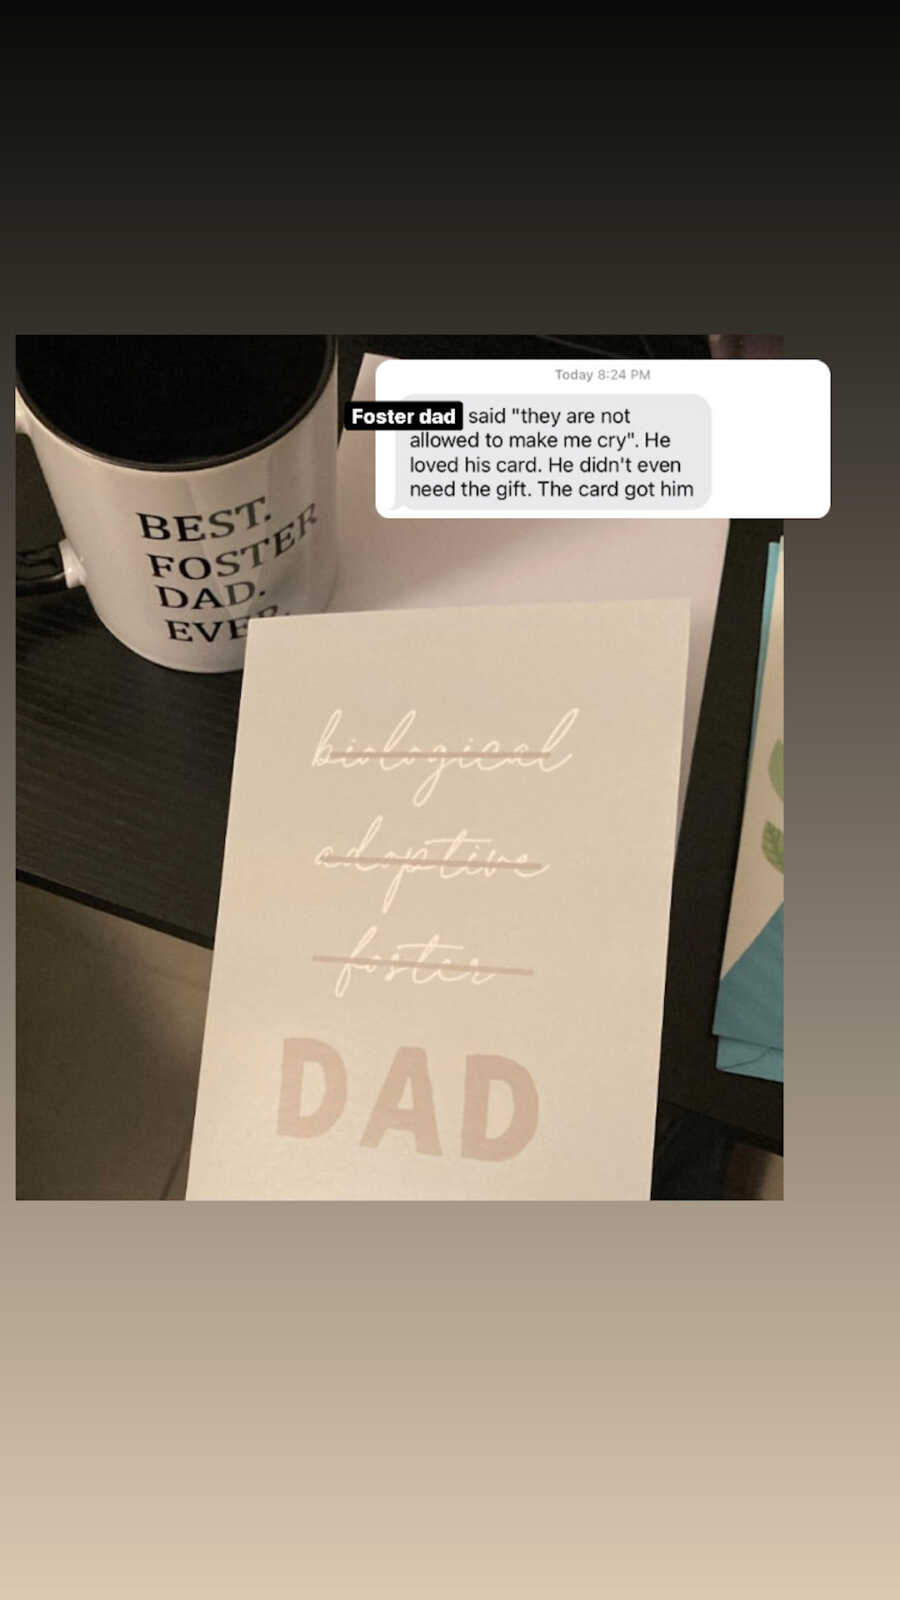 gift given to foster dad from biological mom with text thanking her